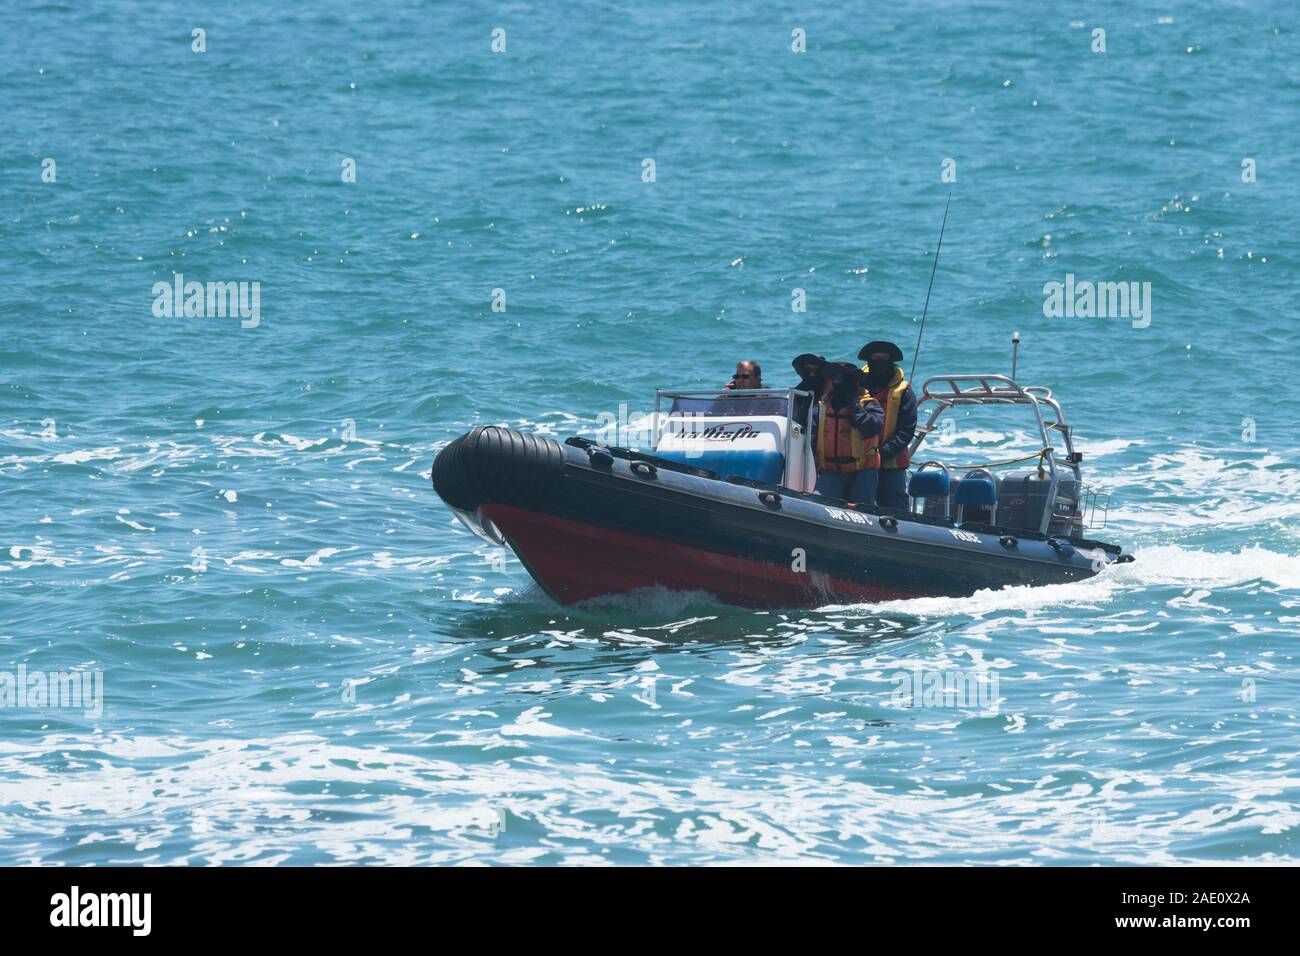 South African police dive unit in an inflatable rubber dingy boat during a patrol search and rescue operation for missing people in Cape Town Stock Photo